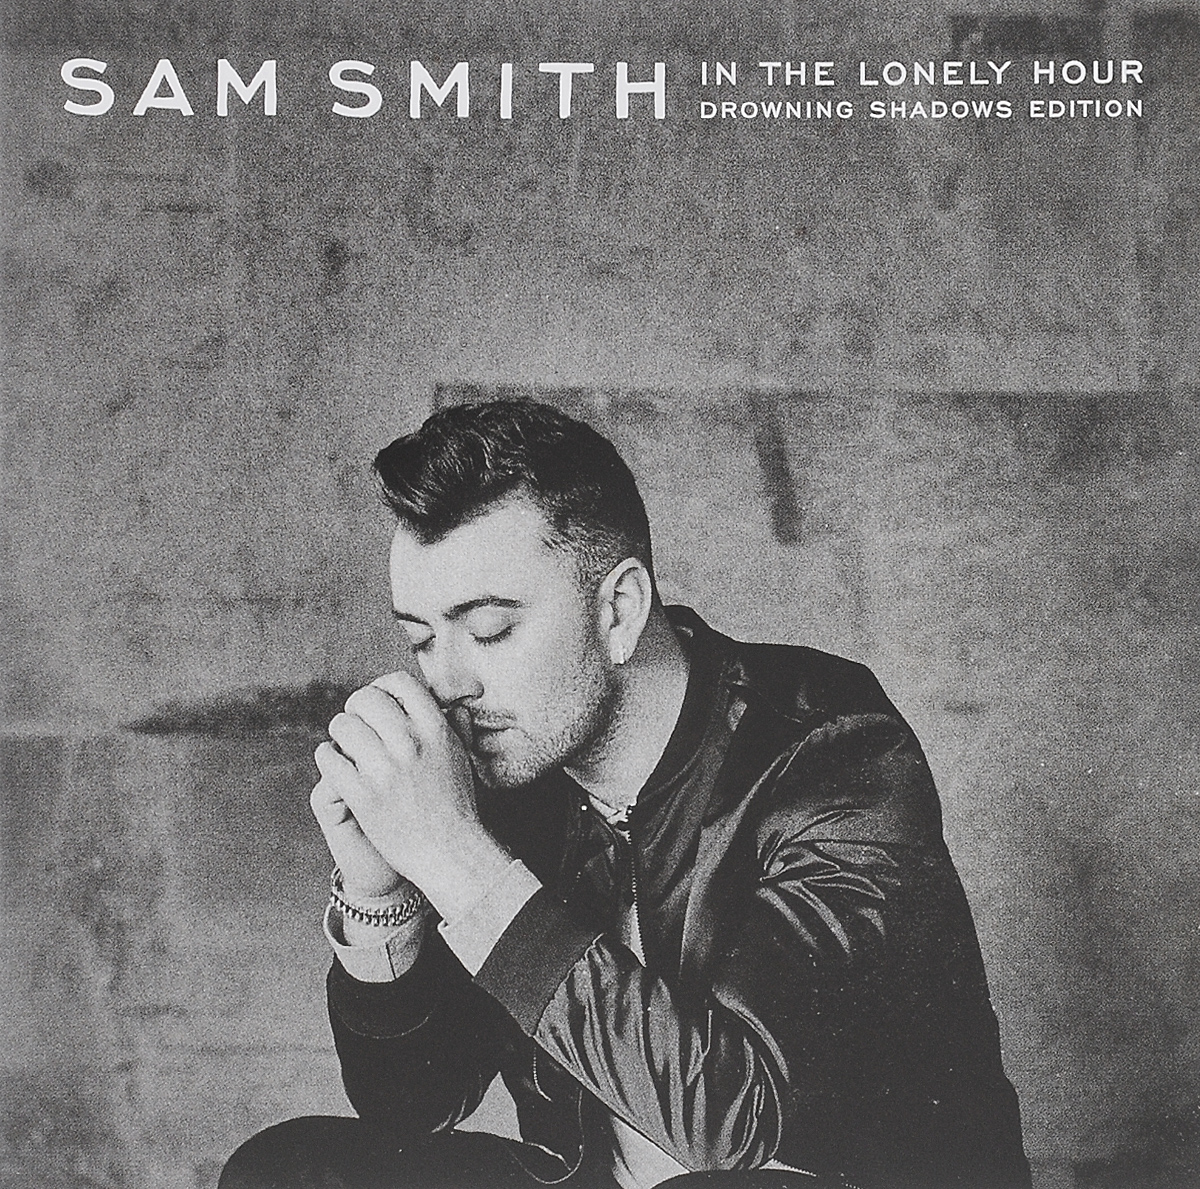 Sam Smith. In The Lonely Hour. Drowning Shadows Edition (2 CD)